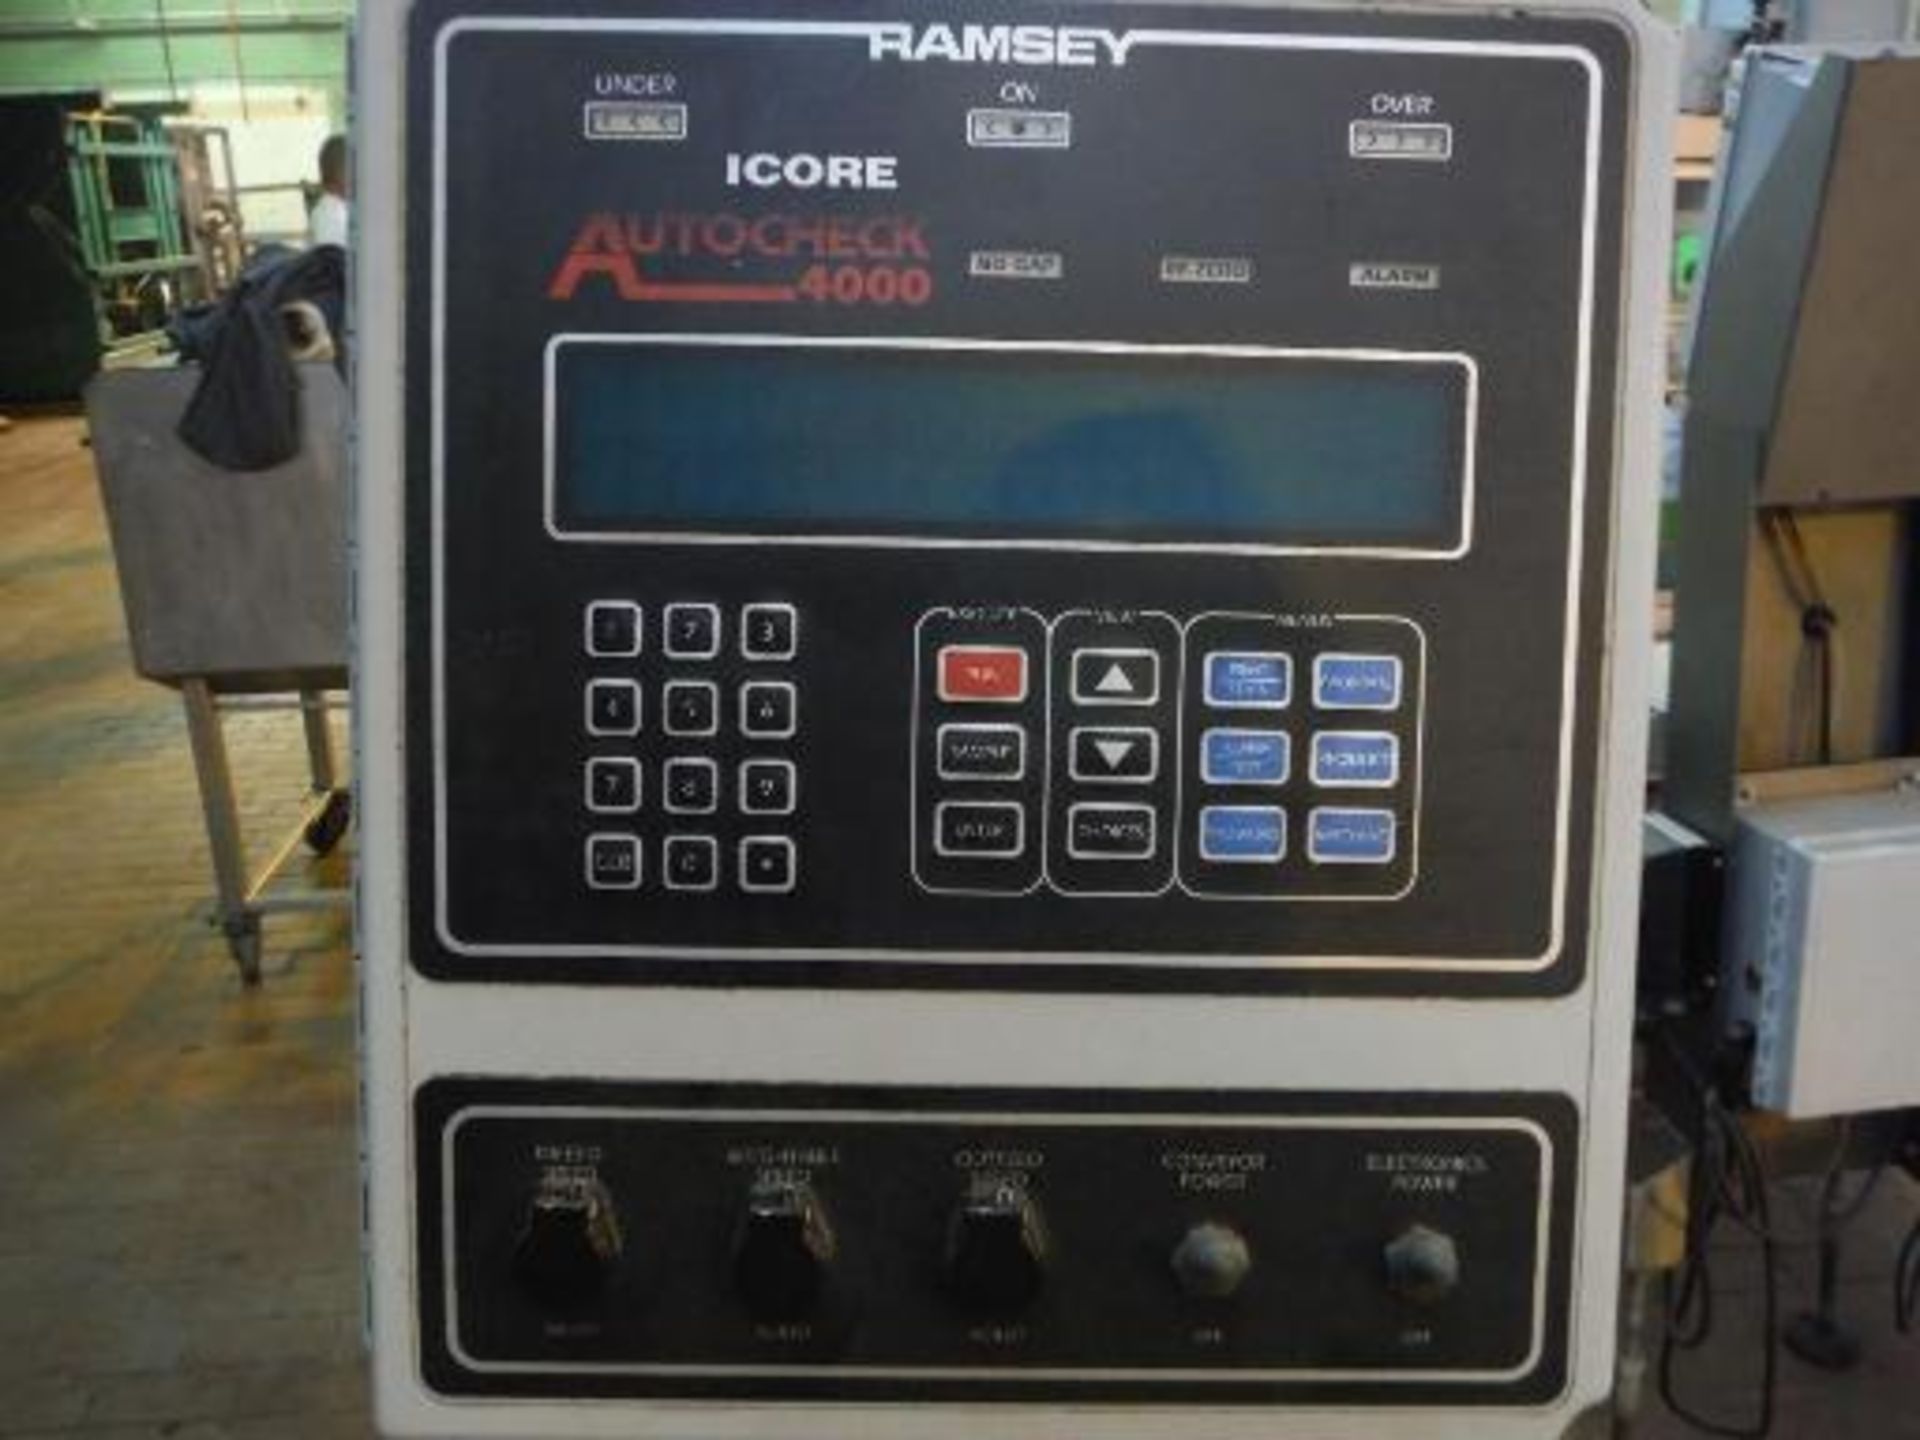 Ramsey Icore Autocheck 4000 checkweigher, 100 in. long x up to 14 in. wide belt, adjustable - Image 2 of 3